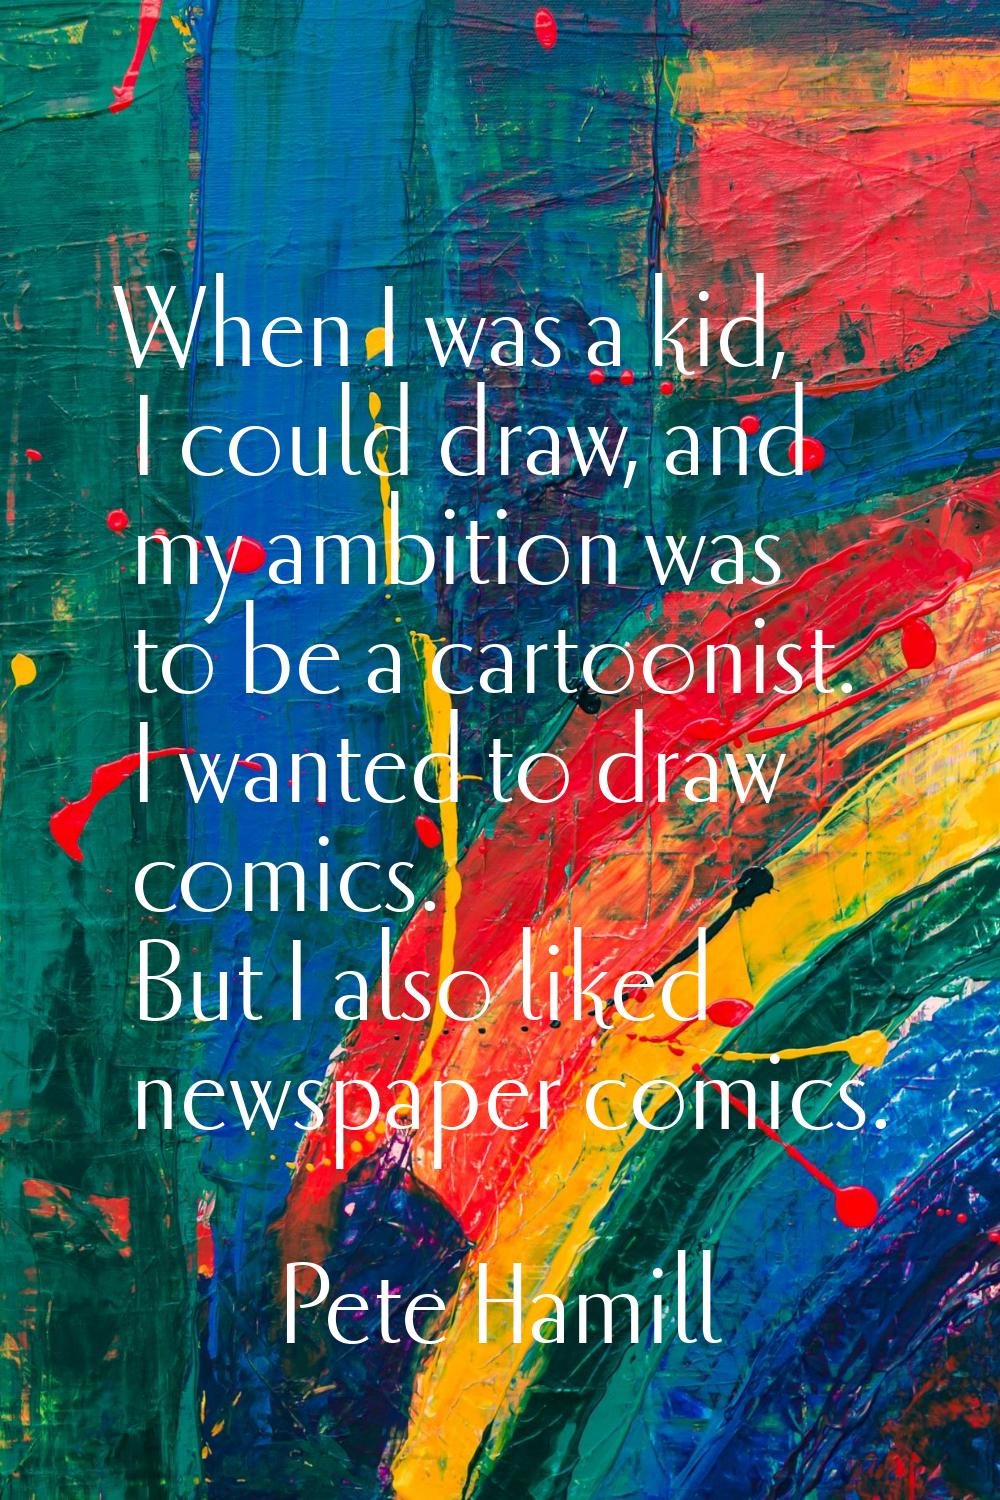 When I was a kid, I could draw, and my ambition was to be a cartoonist. I wanted to draw comics. Bu